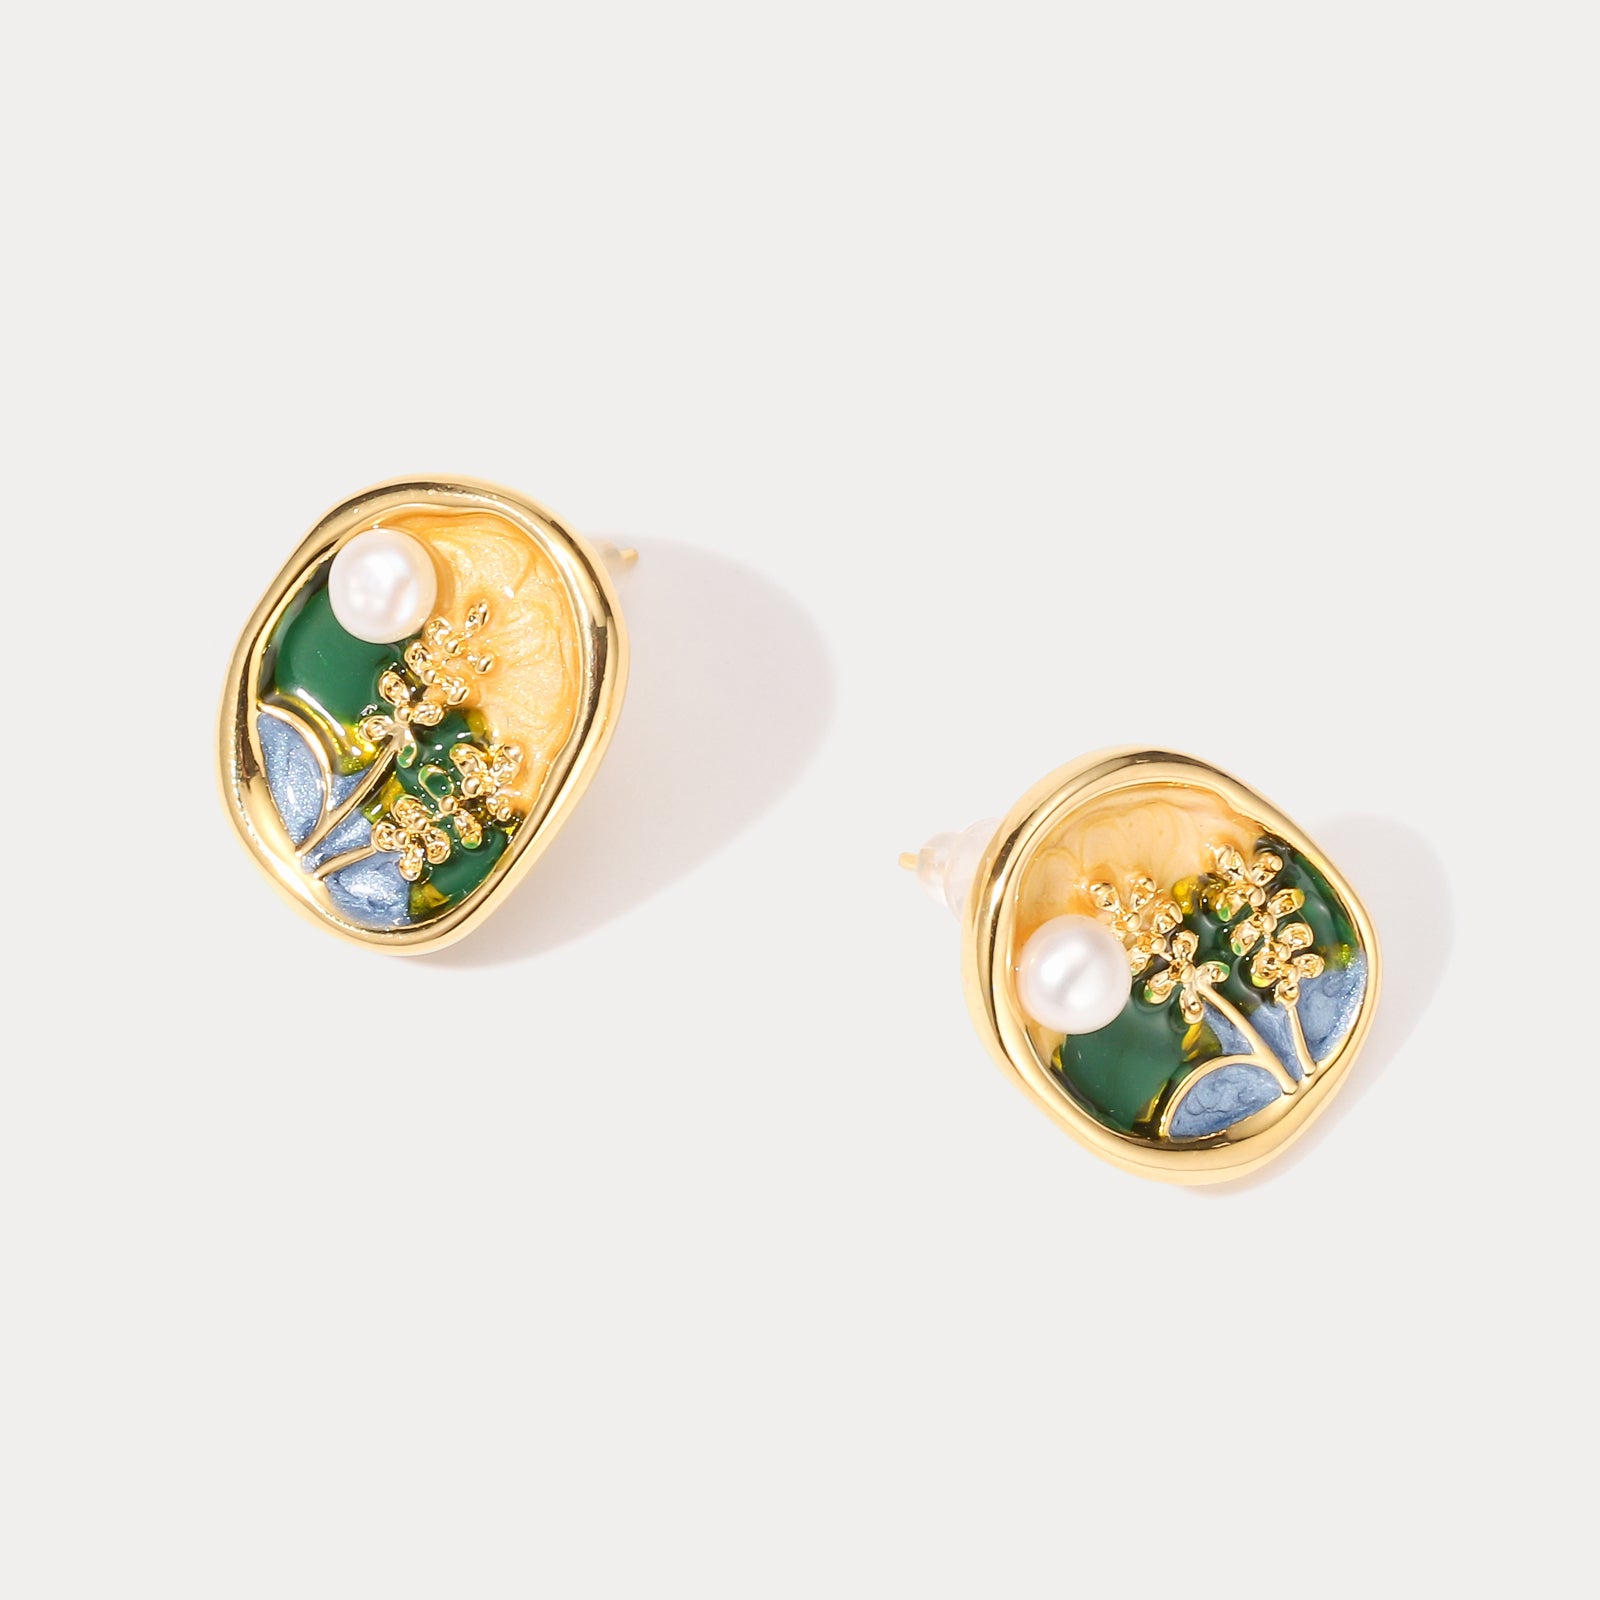 Country Cornfield Dripping Oil Earrings